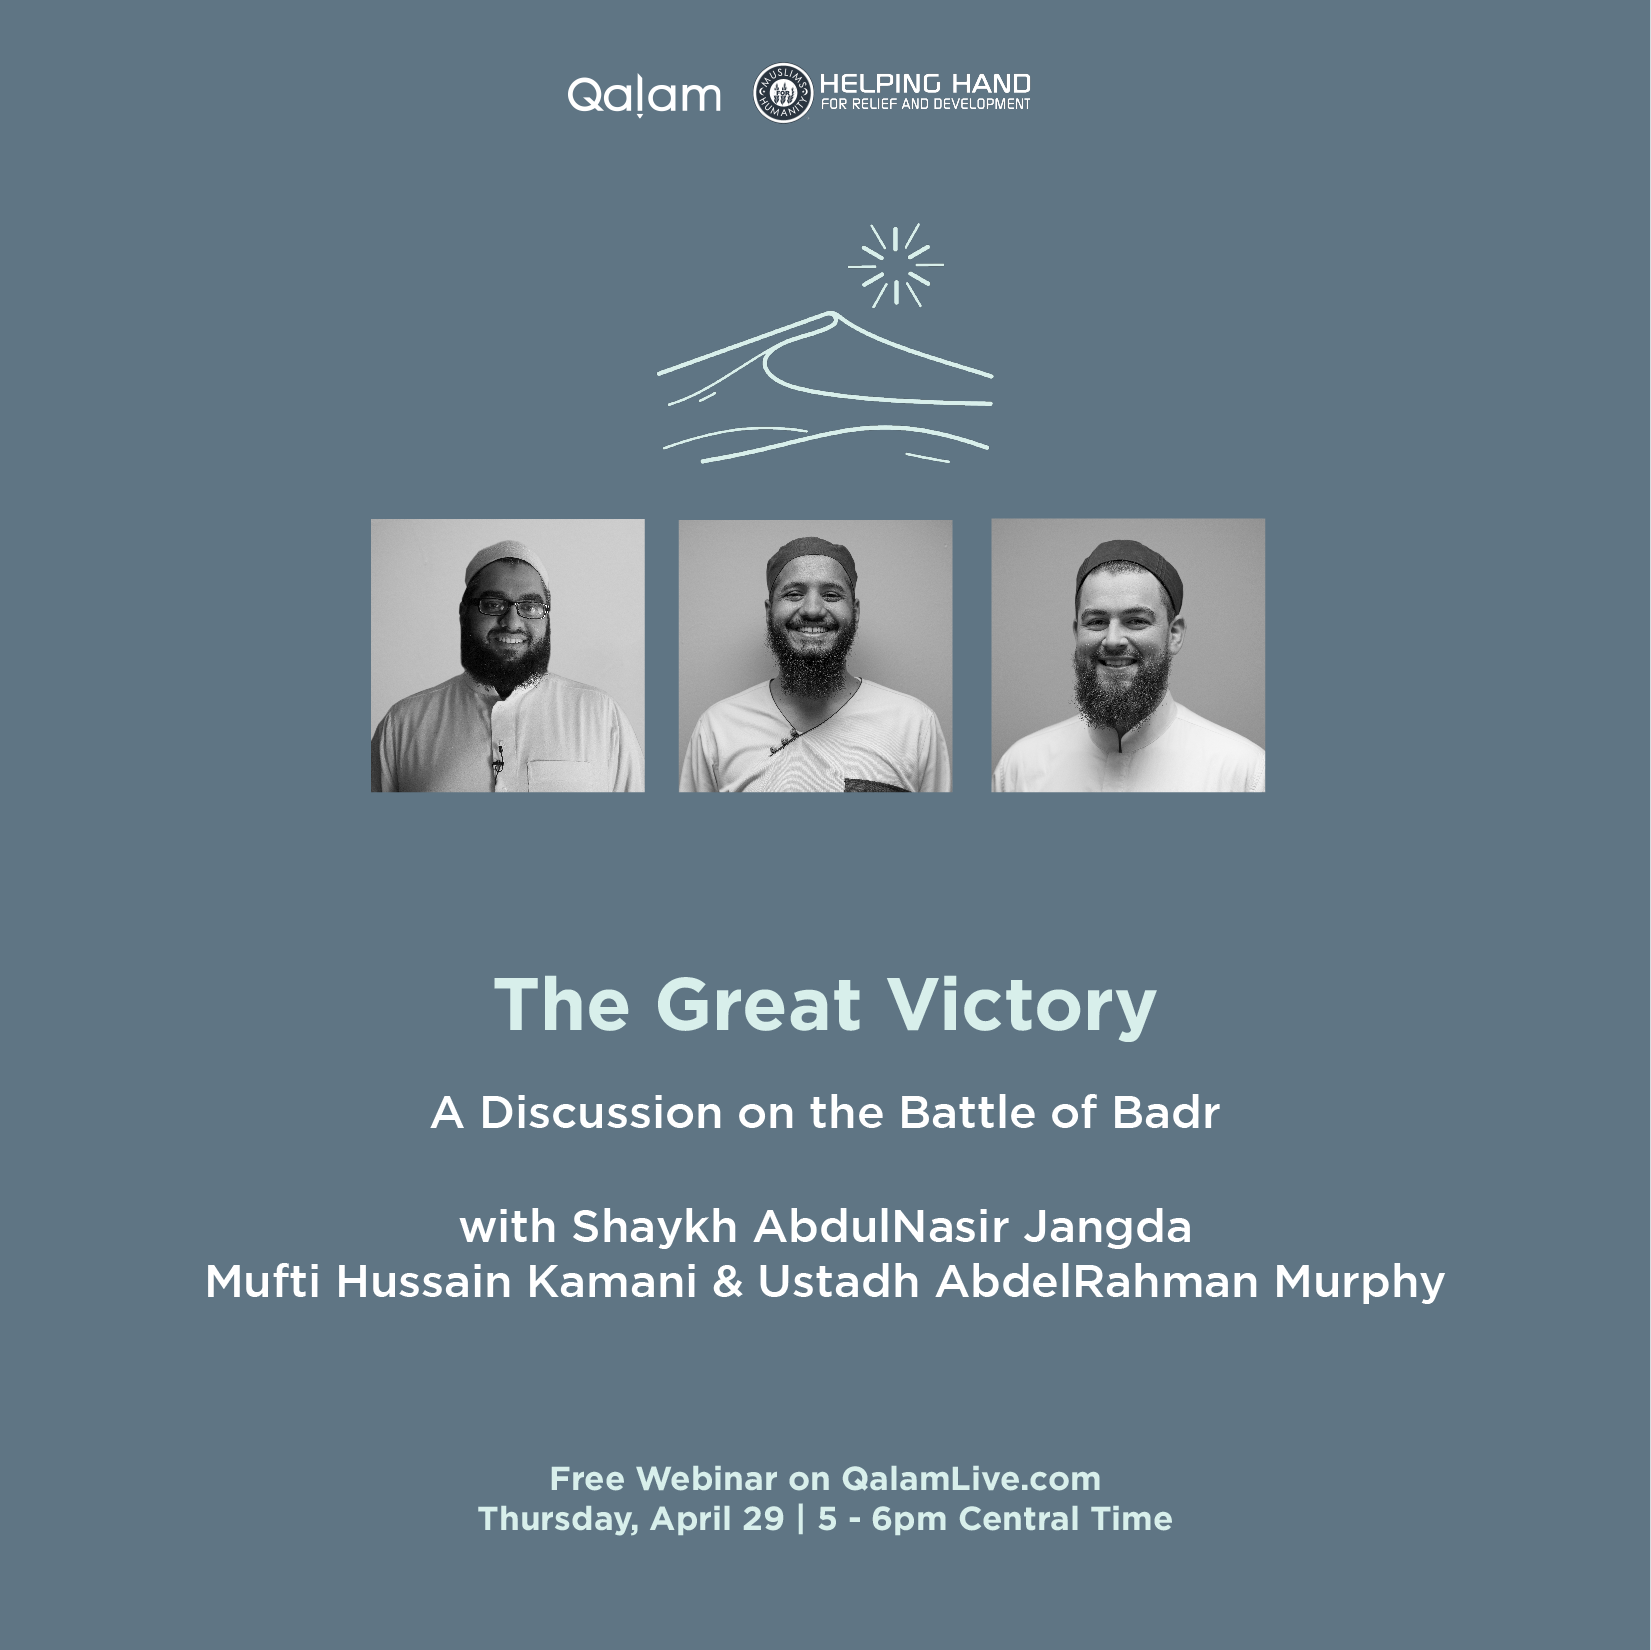 The Great Victory: A Discussion on the Battle of Badr